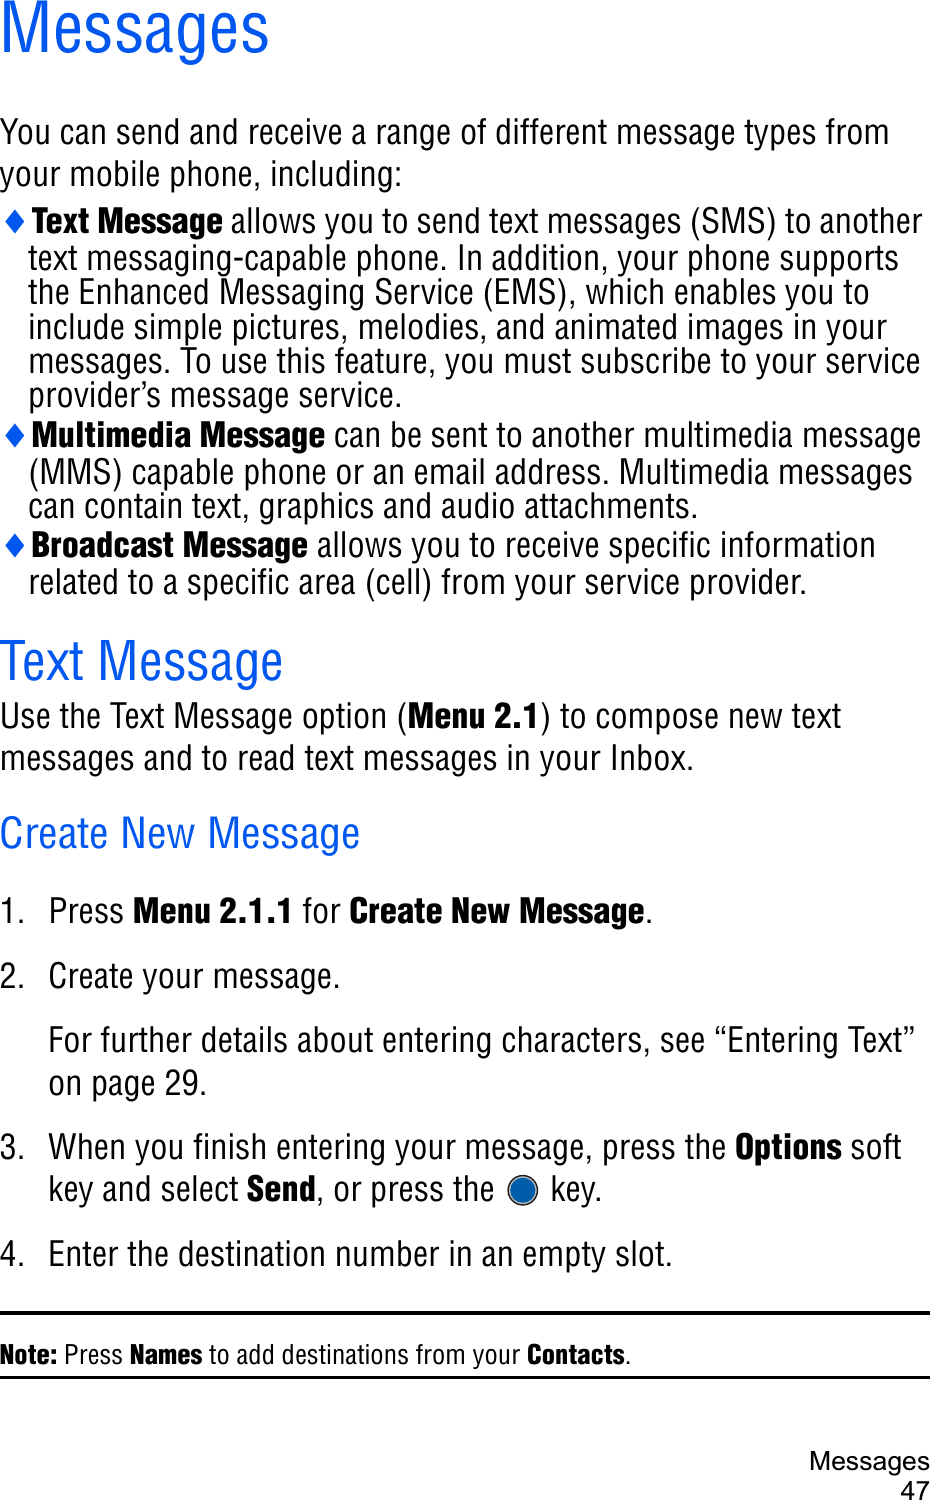 Messages47MessagesYou can send and receive a range of different message types from your mobile phone, including:iText Message allows you to send text messages (SMS) to another text messaging-capable phone. In addition, your phone supports the Enhanced Messaging Service (EMS), which enables you to include simple pictures, melodies, and animated images in your messages. To use this feature, you must subscribe to your service provider’s message service.iMultimedia Message can be sent to another multimedia message (MMS) capable phone or an email address. Multimedia messages can contain text, graphics and audio attachments.iBroadcast Message allows you to receive specific information related to a specific area (cell) from your service provider. Text MessageUse the Text Message option (Menu 2.1) to compose new text messages and to read text messages in your Inbox. Create New Message1. Press Menu 2.1.1 for Create New Message.2. Create your message.For further details about entering characters, see “Entering Text” on page 29.3. When you finish entering your message, press the Options soft key and select Send, or press the   key.4. Enter the destination number in an empty slot.Note: Press Names to add destinations from your Contacts.